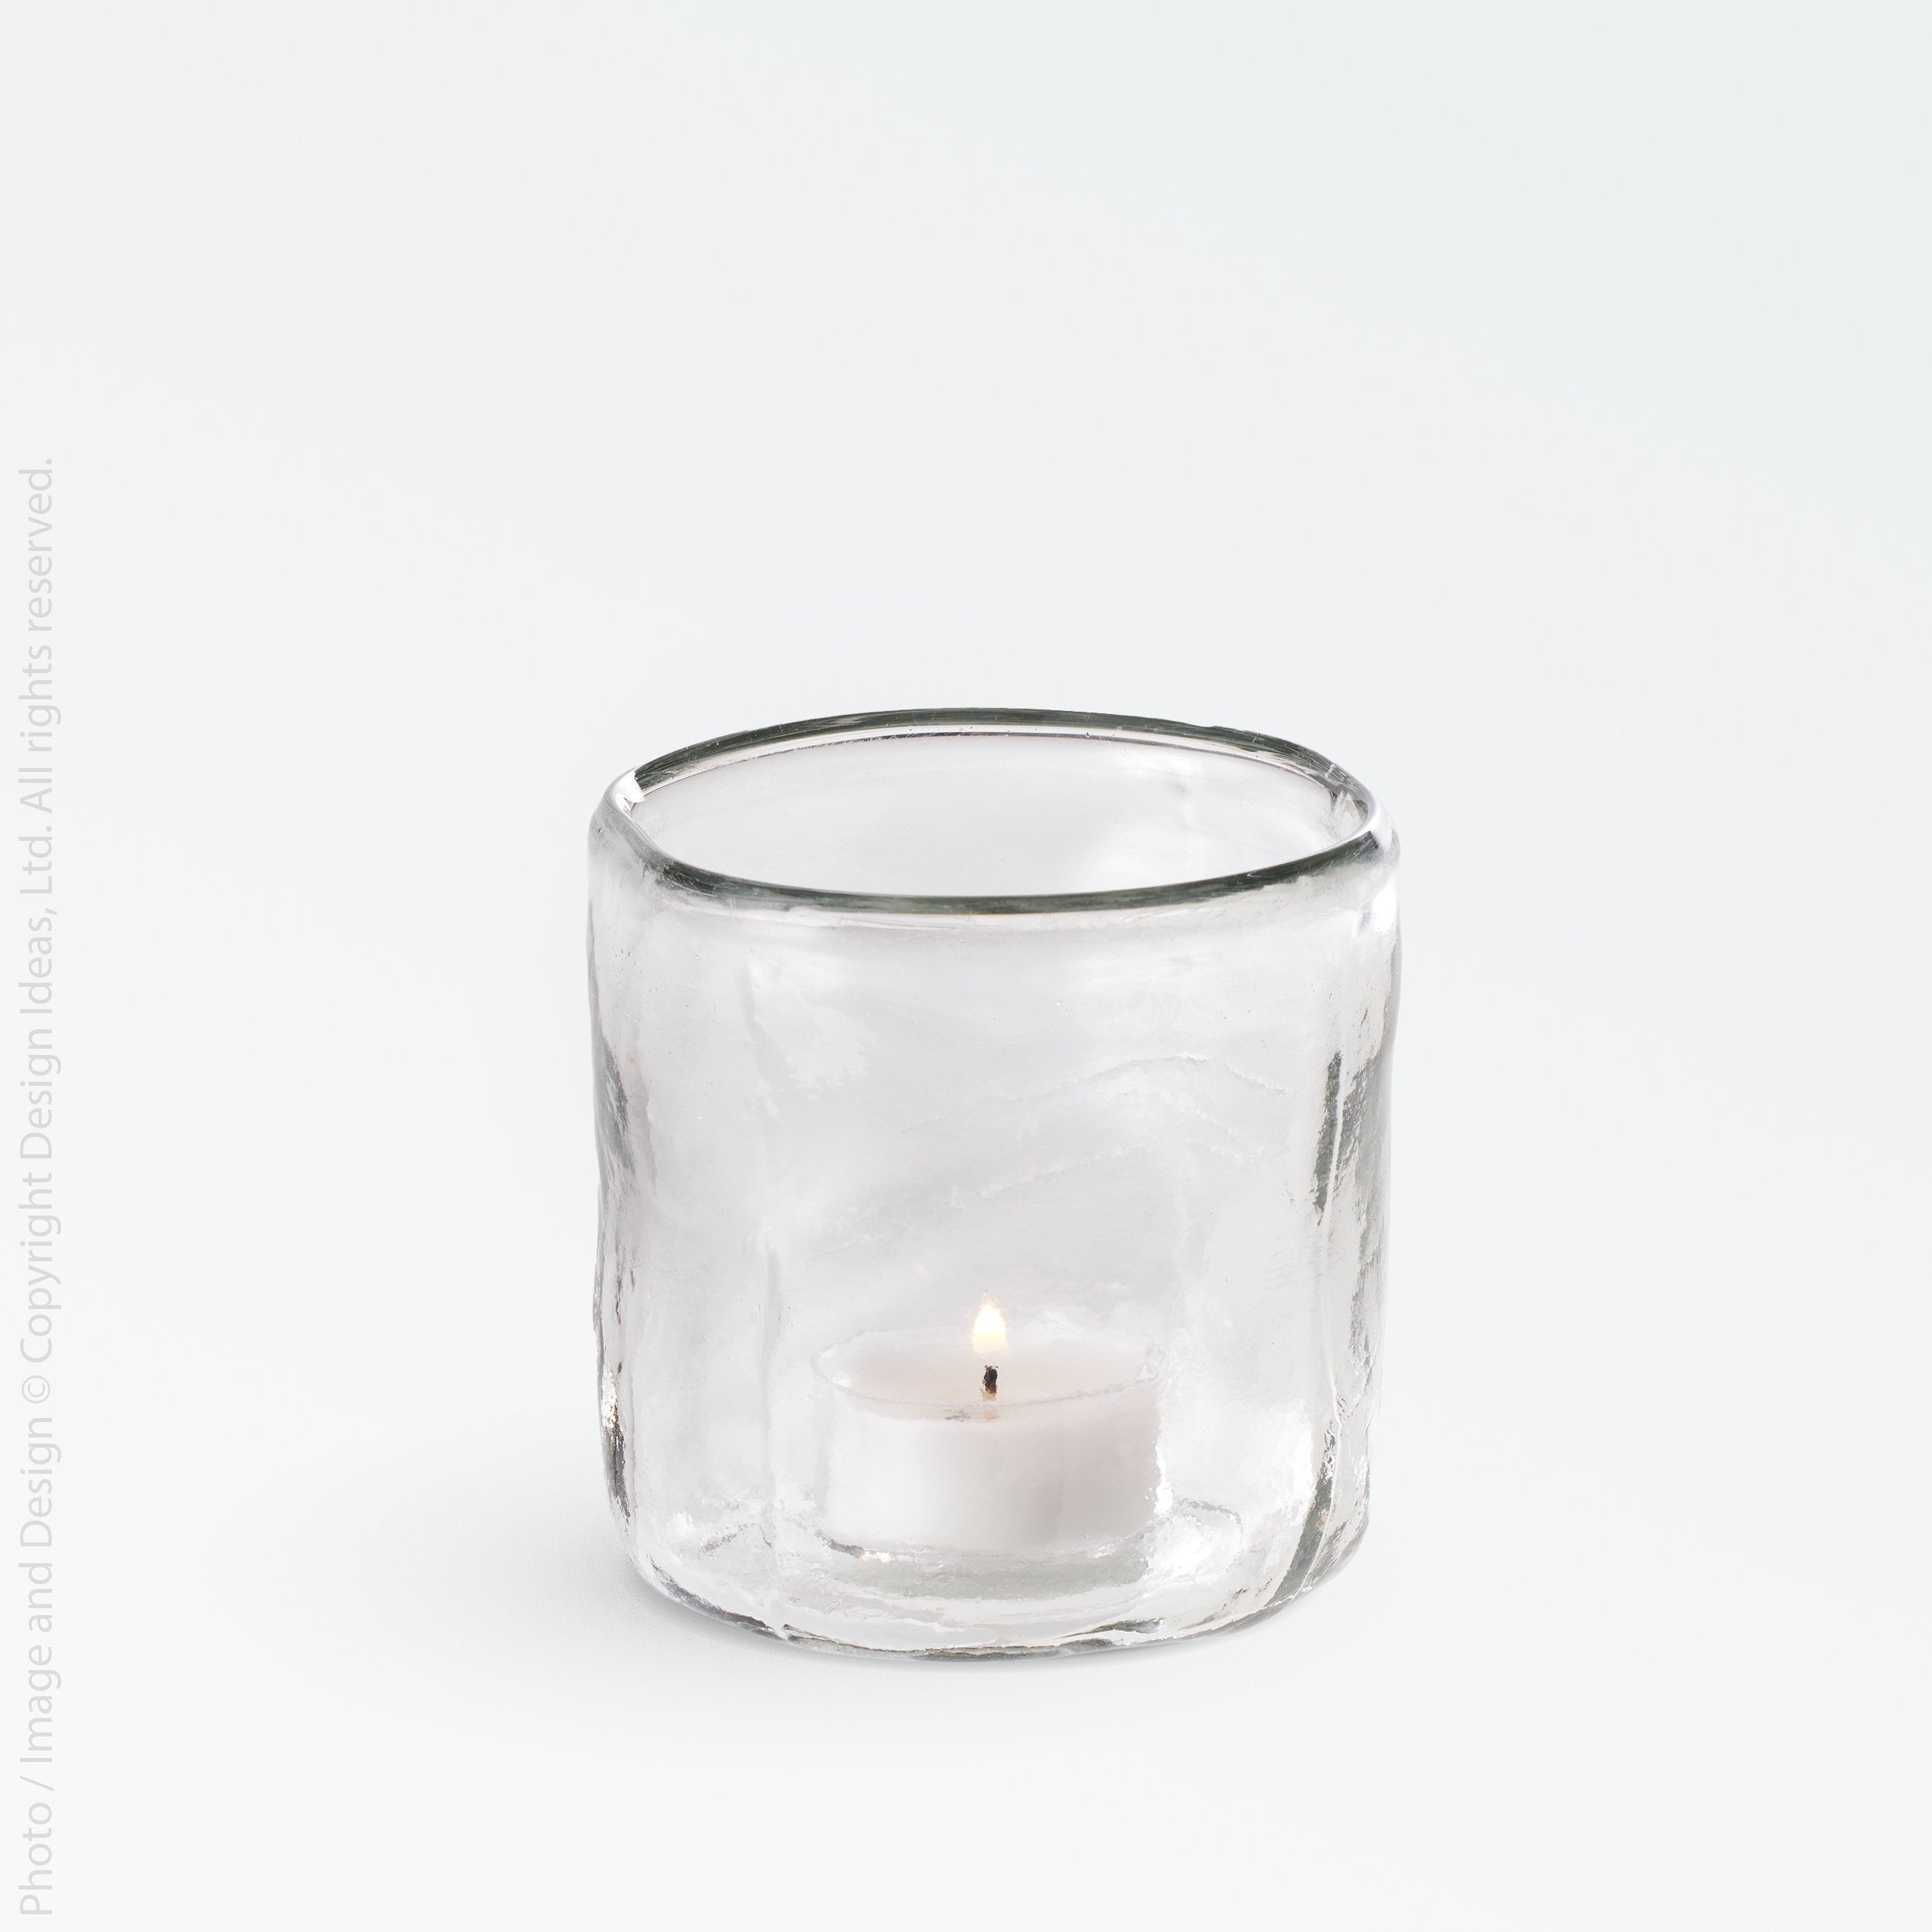 Wabisabi Glass Votive Candle Holder - white color | Image 1 | From the Wabisabi Collection | Exquisitely crafted with natural glass for long lasting use | Available in clear color | texxture home